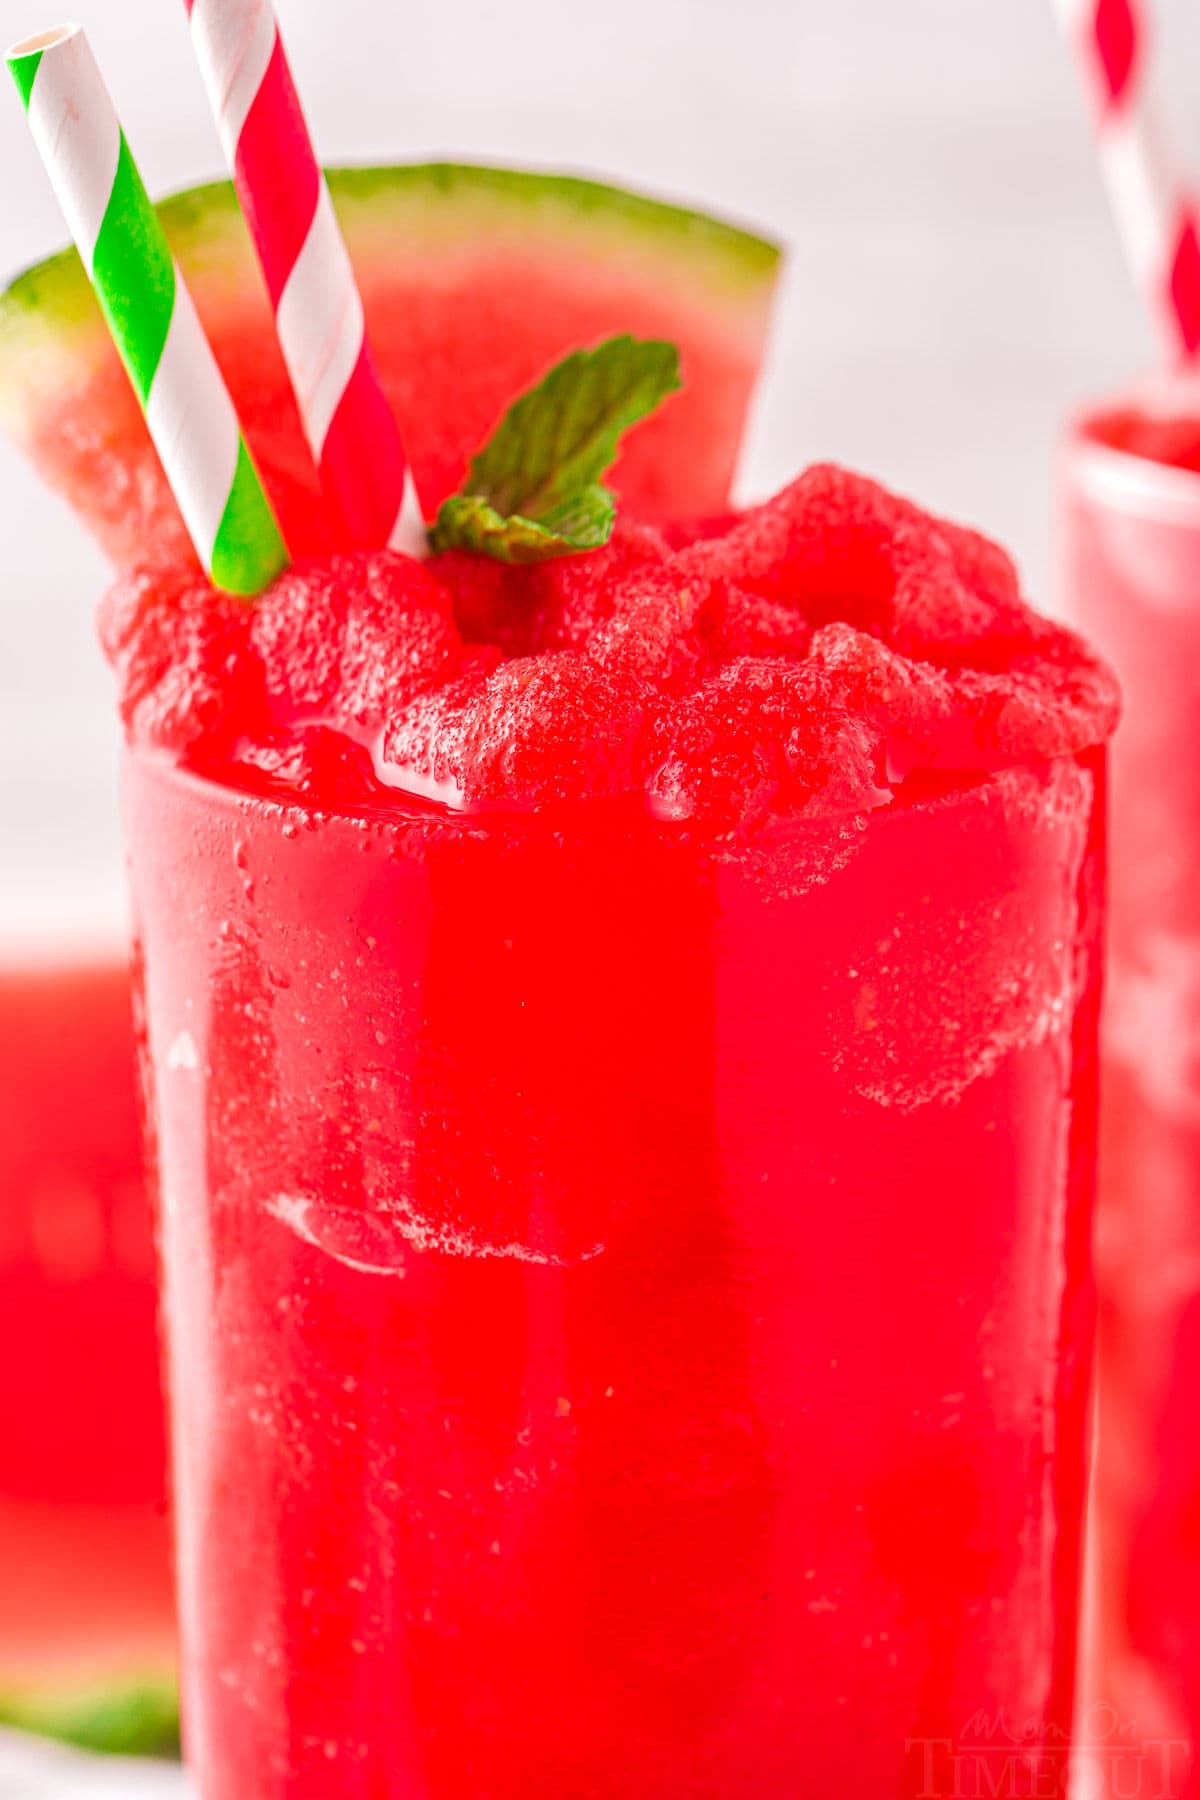 close up view of a tall clear glass filled to the top with watermelon slushie. Topped with a sprig of mint and watermelon wedge with two paper straws inserted.